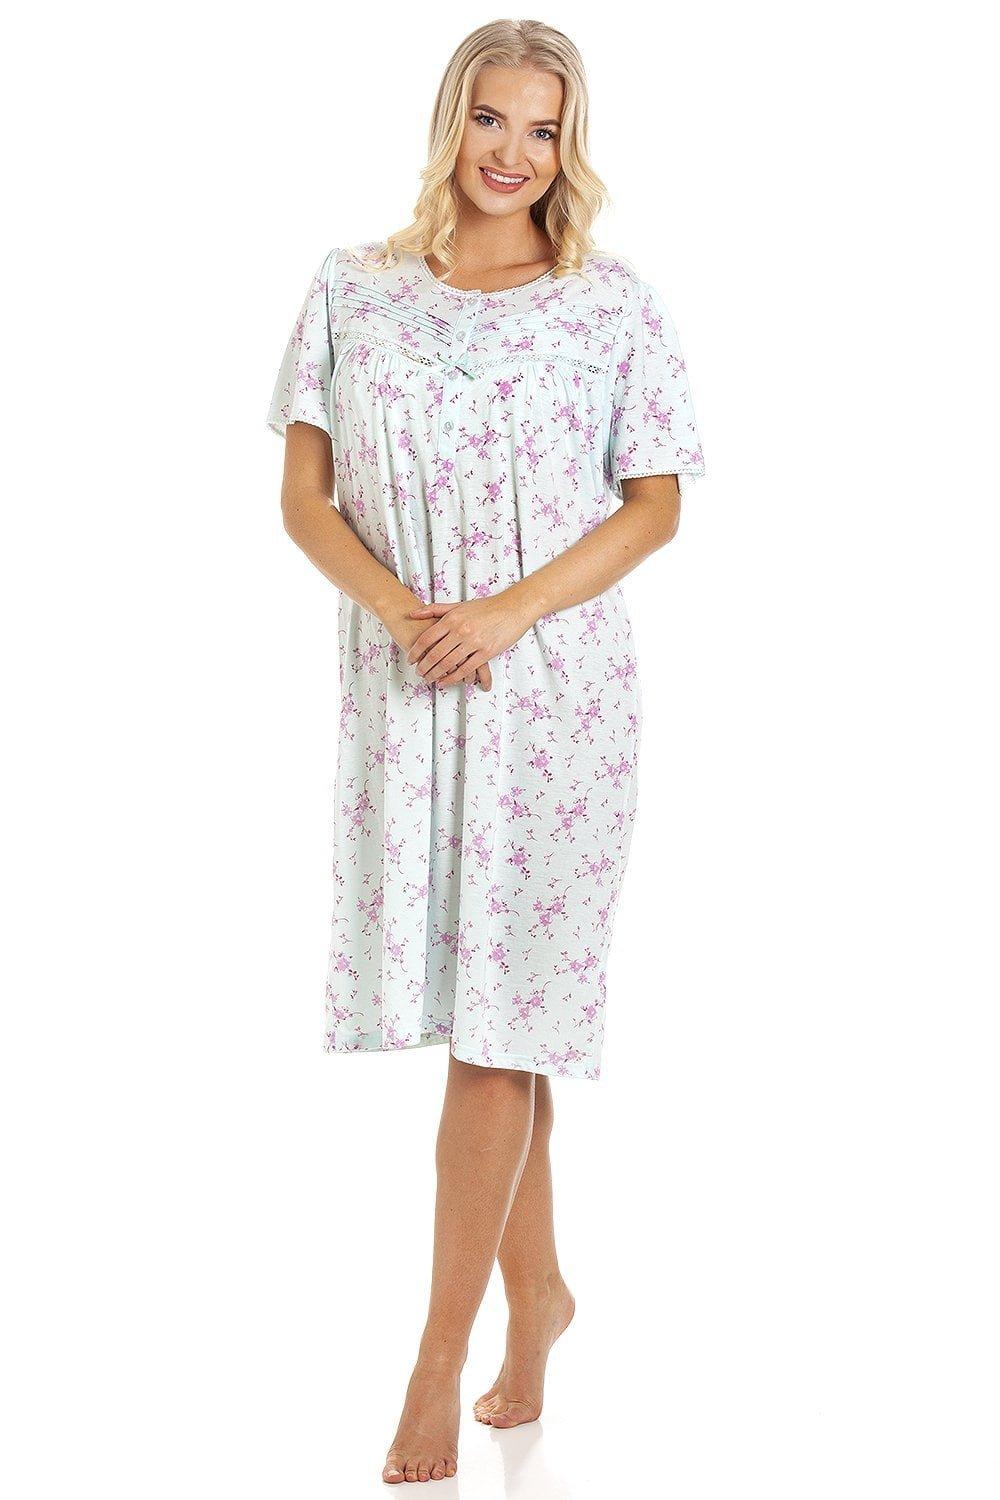 Classic Short Sleeve Floral Nightdress